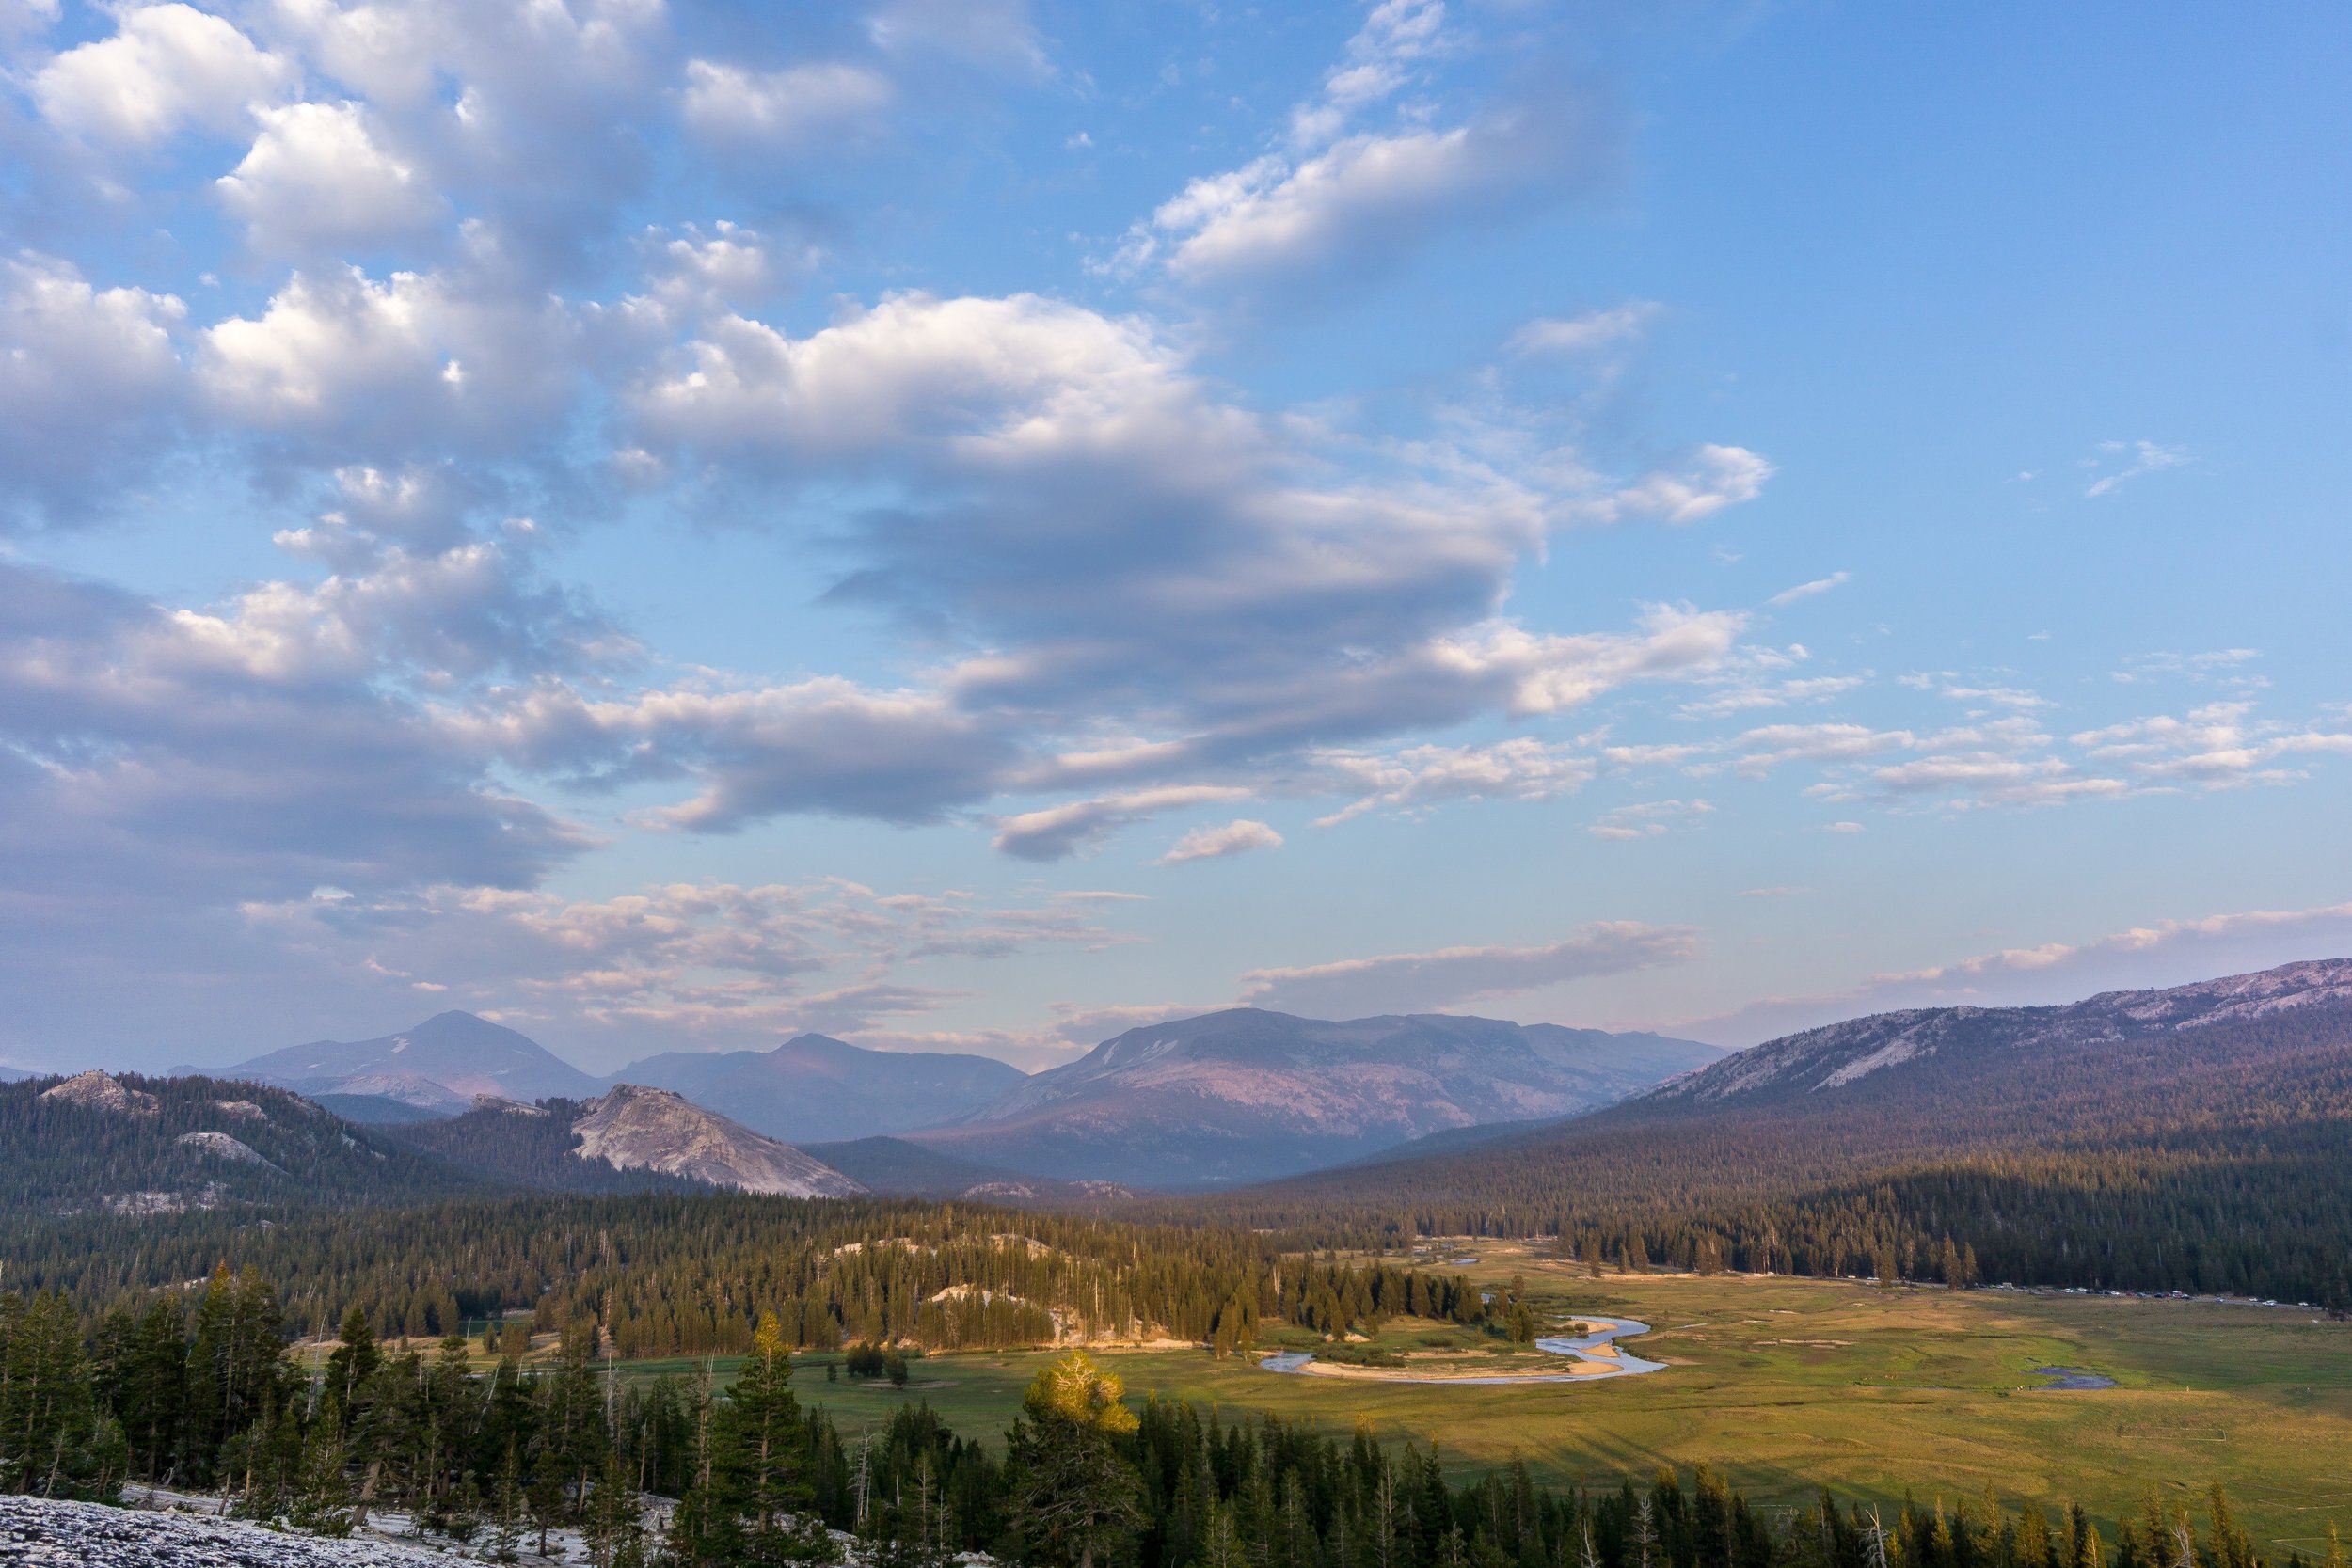  Tuolumne Meadows from the top of Pothole Dome 